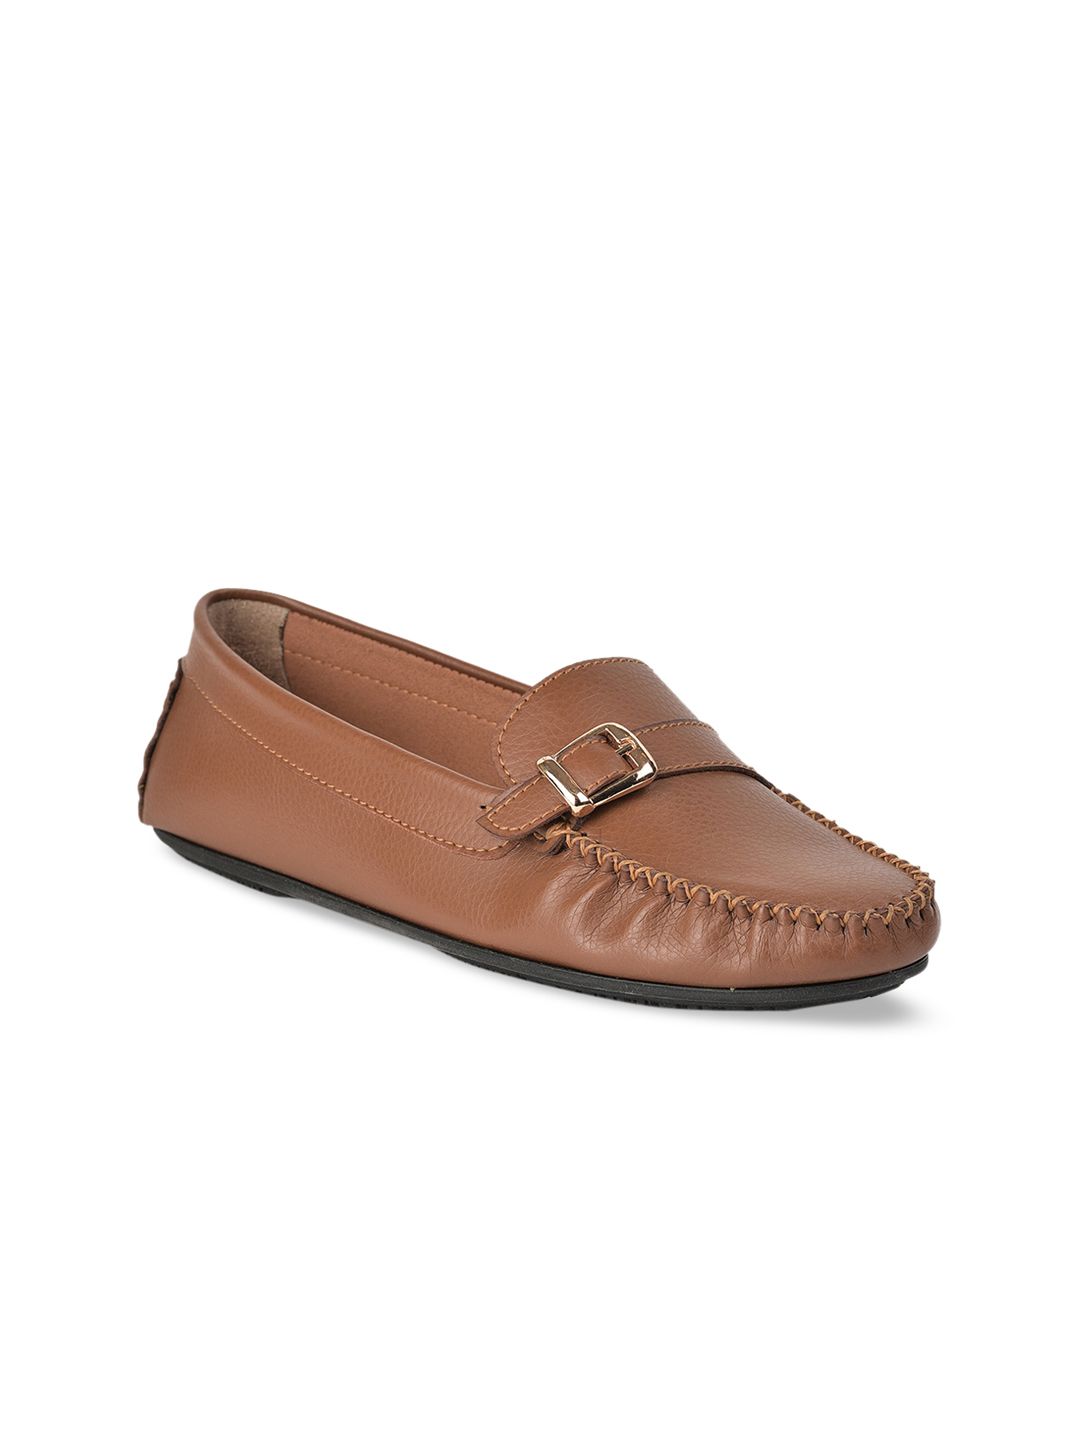 Liberty Women Tan Ballerinas with Buckles Flats Price in India